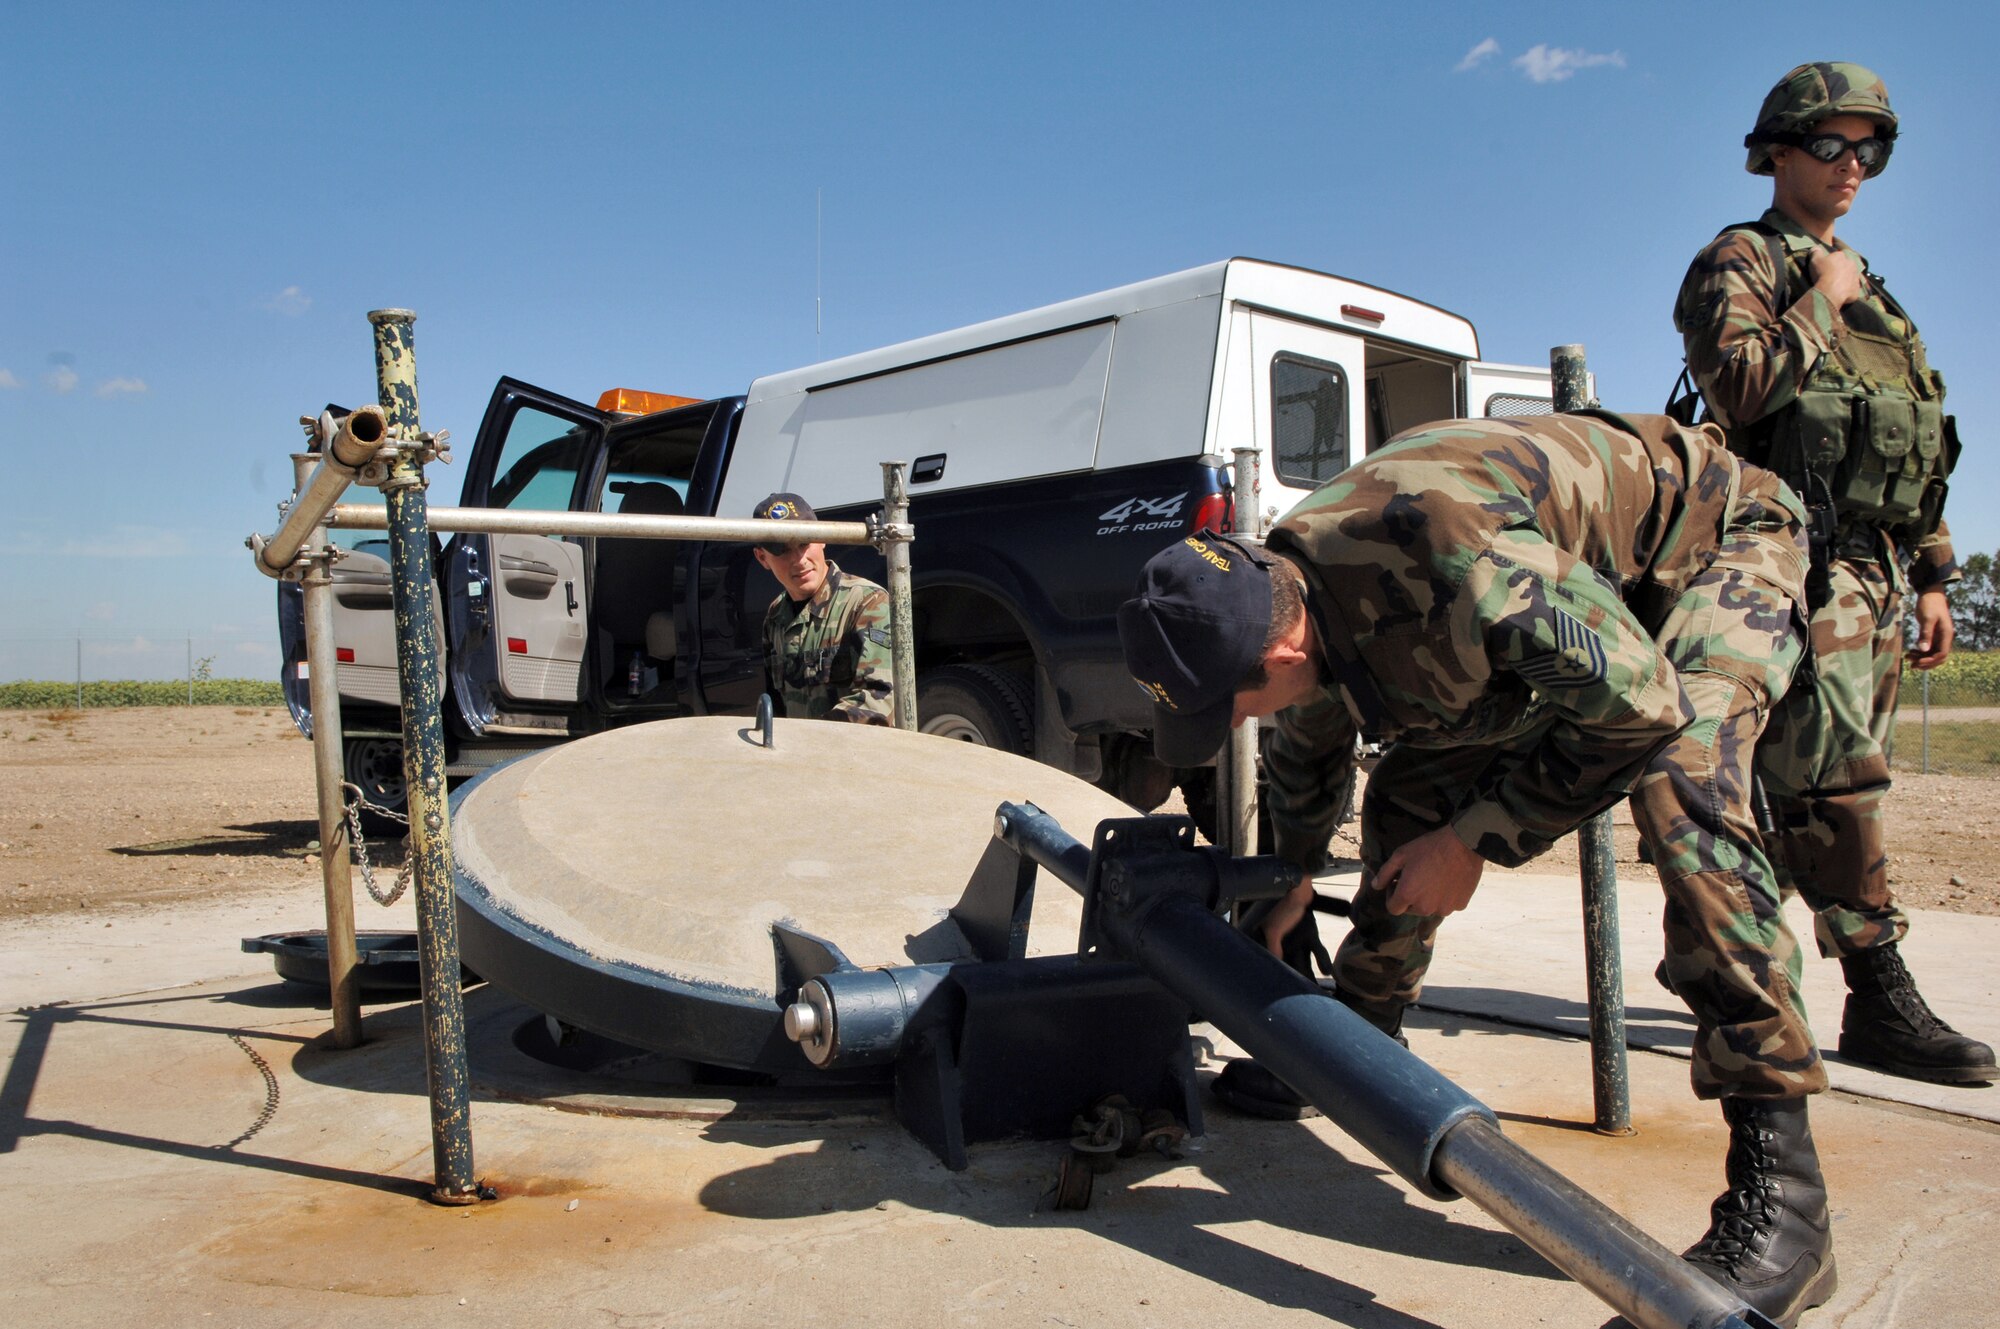 Tech. Sgt. Adam Chandler (center) lowers a reinforced cement protective lid to the personnel access tube while Airman 1st Class Christopher Ramirez (right) keeps an eye on security at a Minuteman III intercontinental ballistic missile launch facility Aug. 25. Security is accomplished with a multi-ton plug that seals the passageway and uses vault-style steel pins to lock it into place. The Airmen are missile handling and security team members with the 91st Missile Wing at Minot Air Force Base, N.D. (U.S. Air Force photo/Airman 1st Class Chris Boitz)
